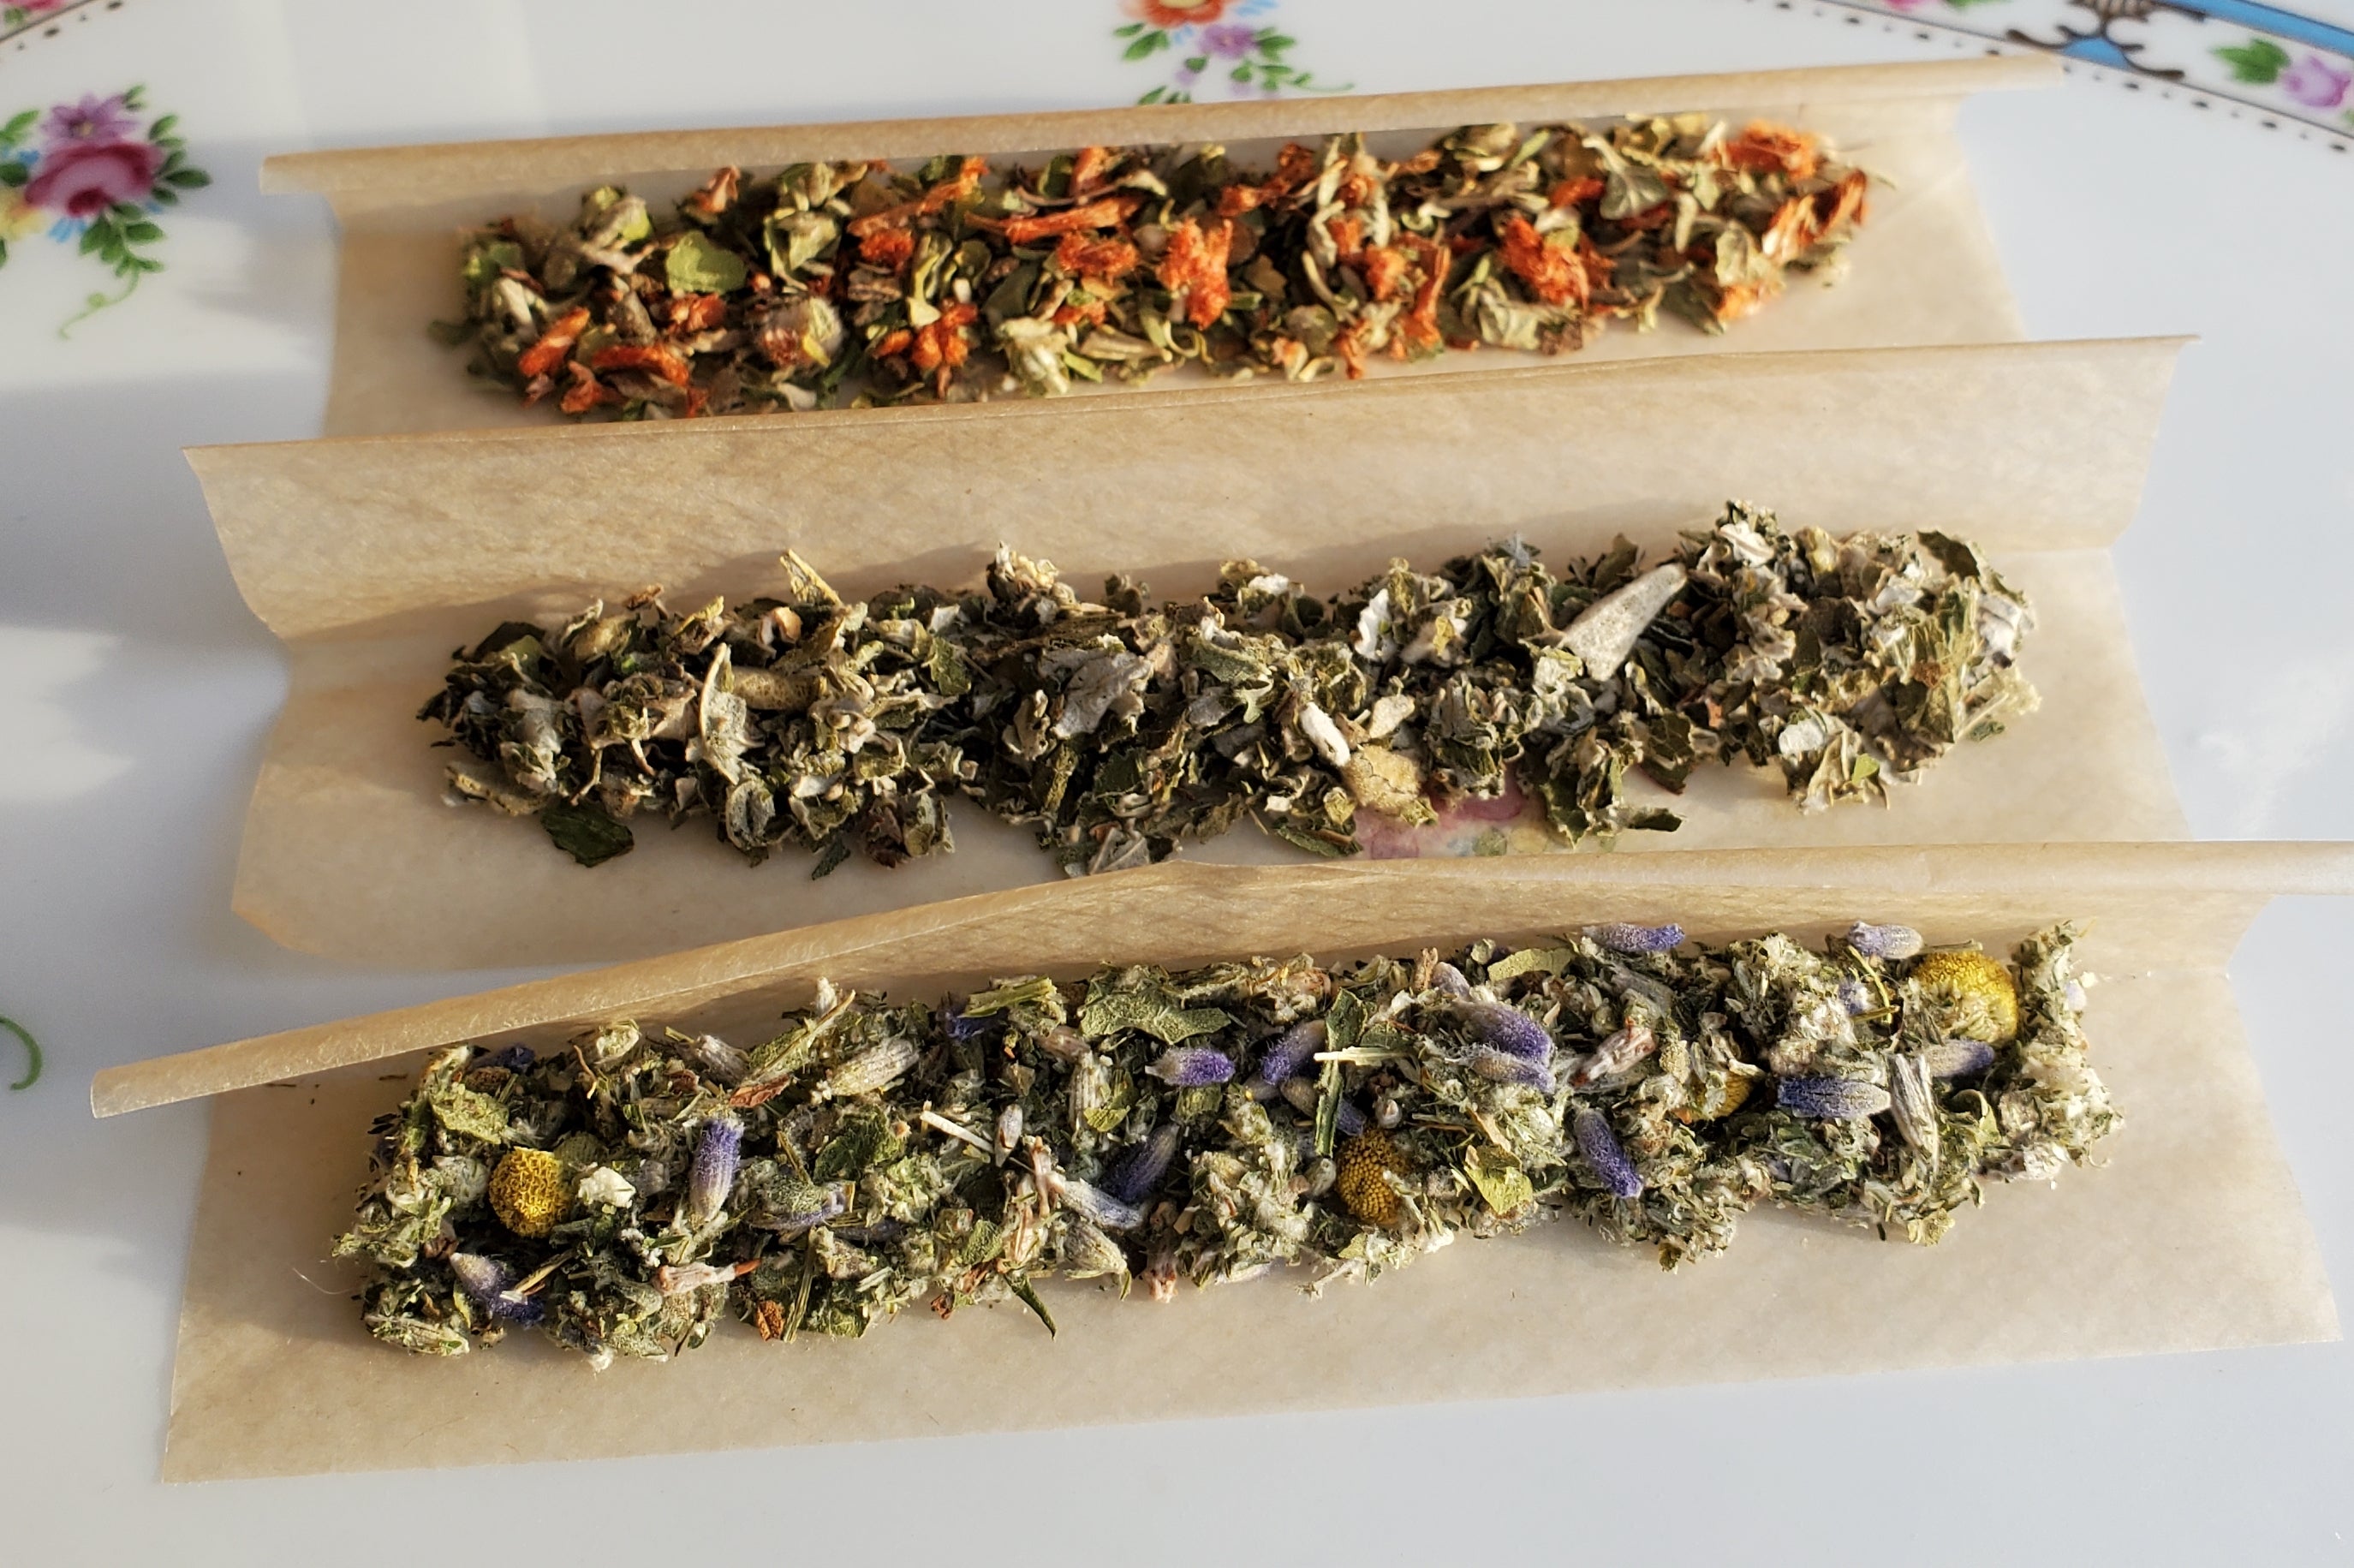 16 Smokable Herbs + Guide on How to Make Your Own Herbal Blends